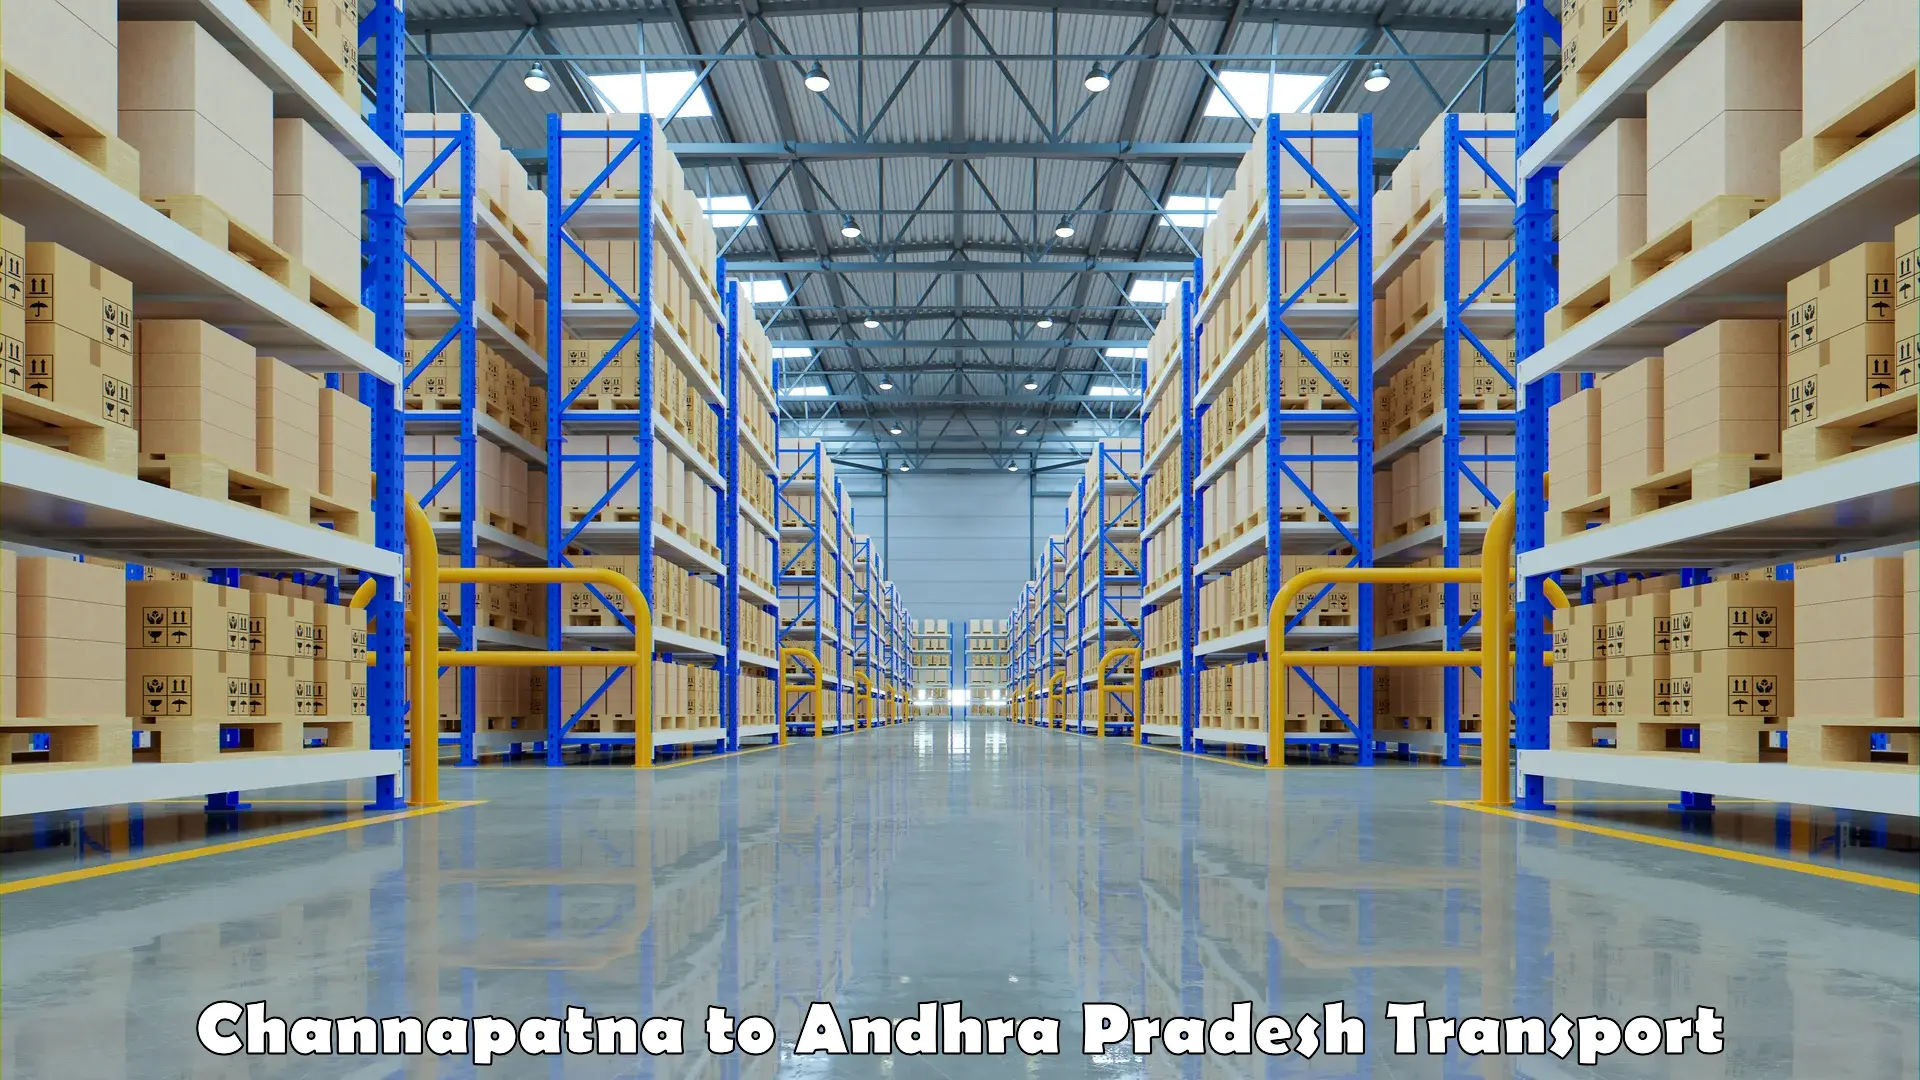 Air freight transport services Channapatna to Andhra Pradesh